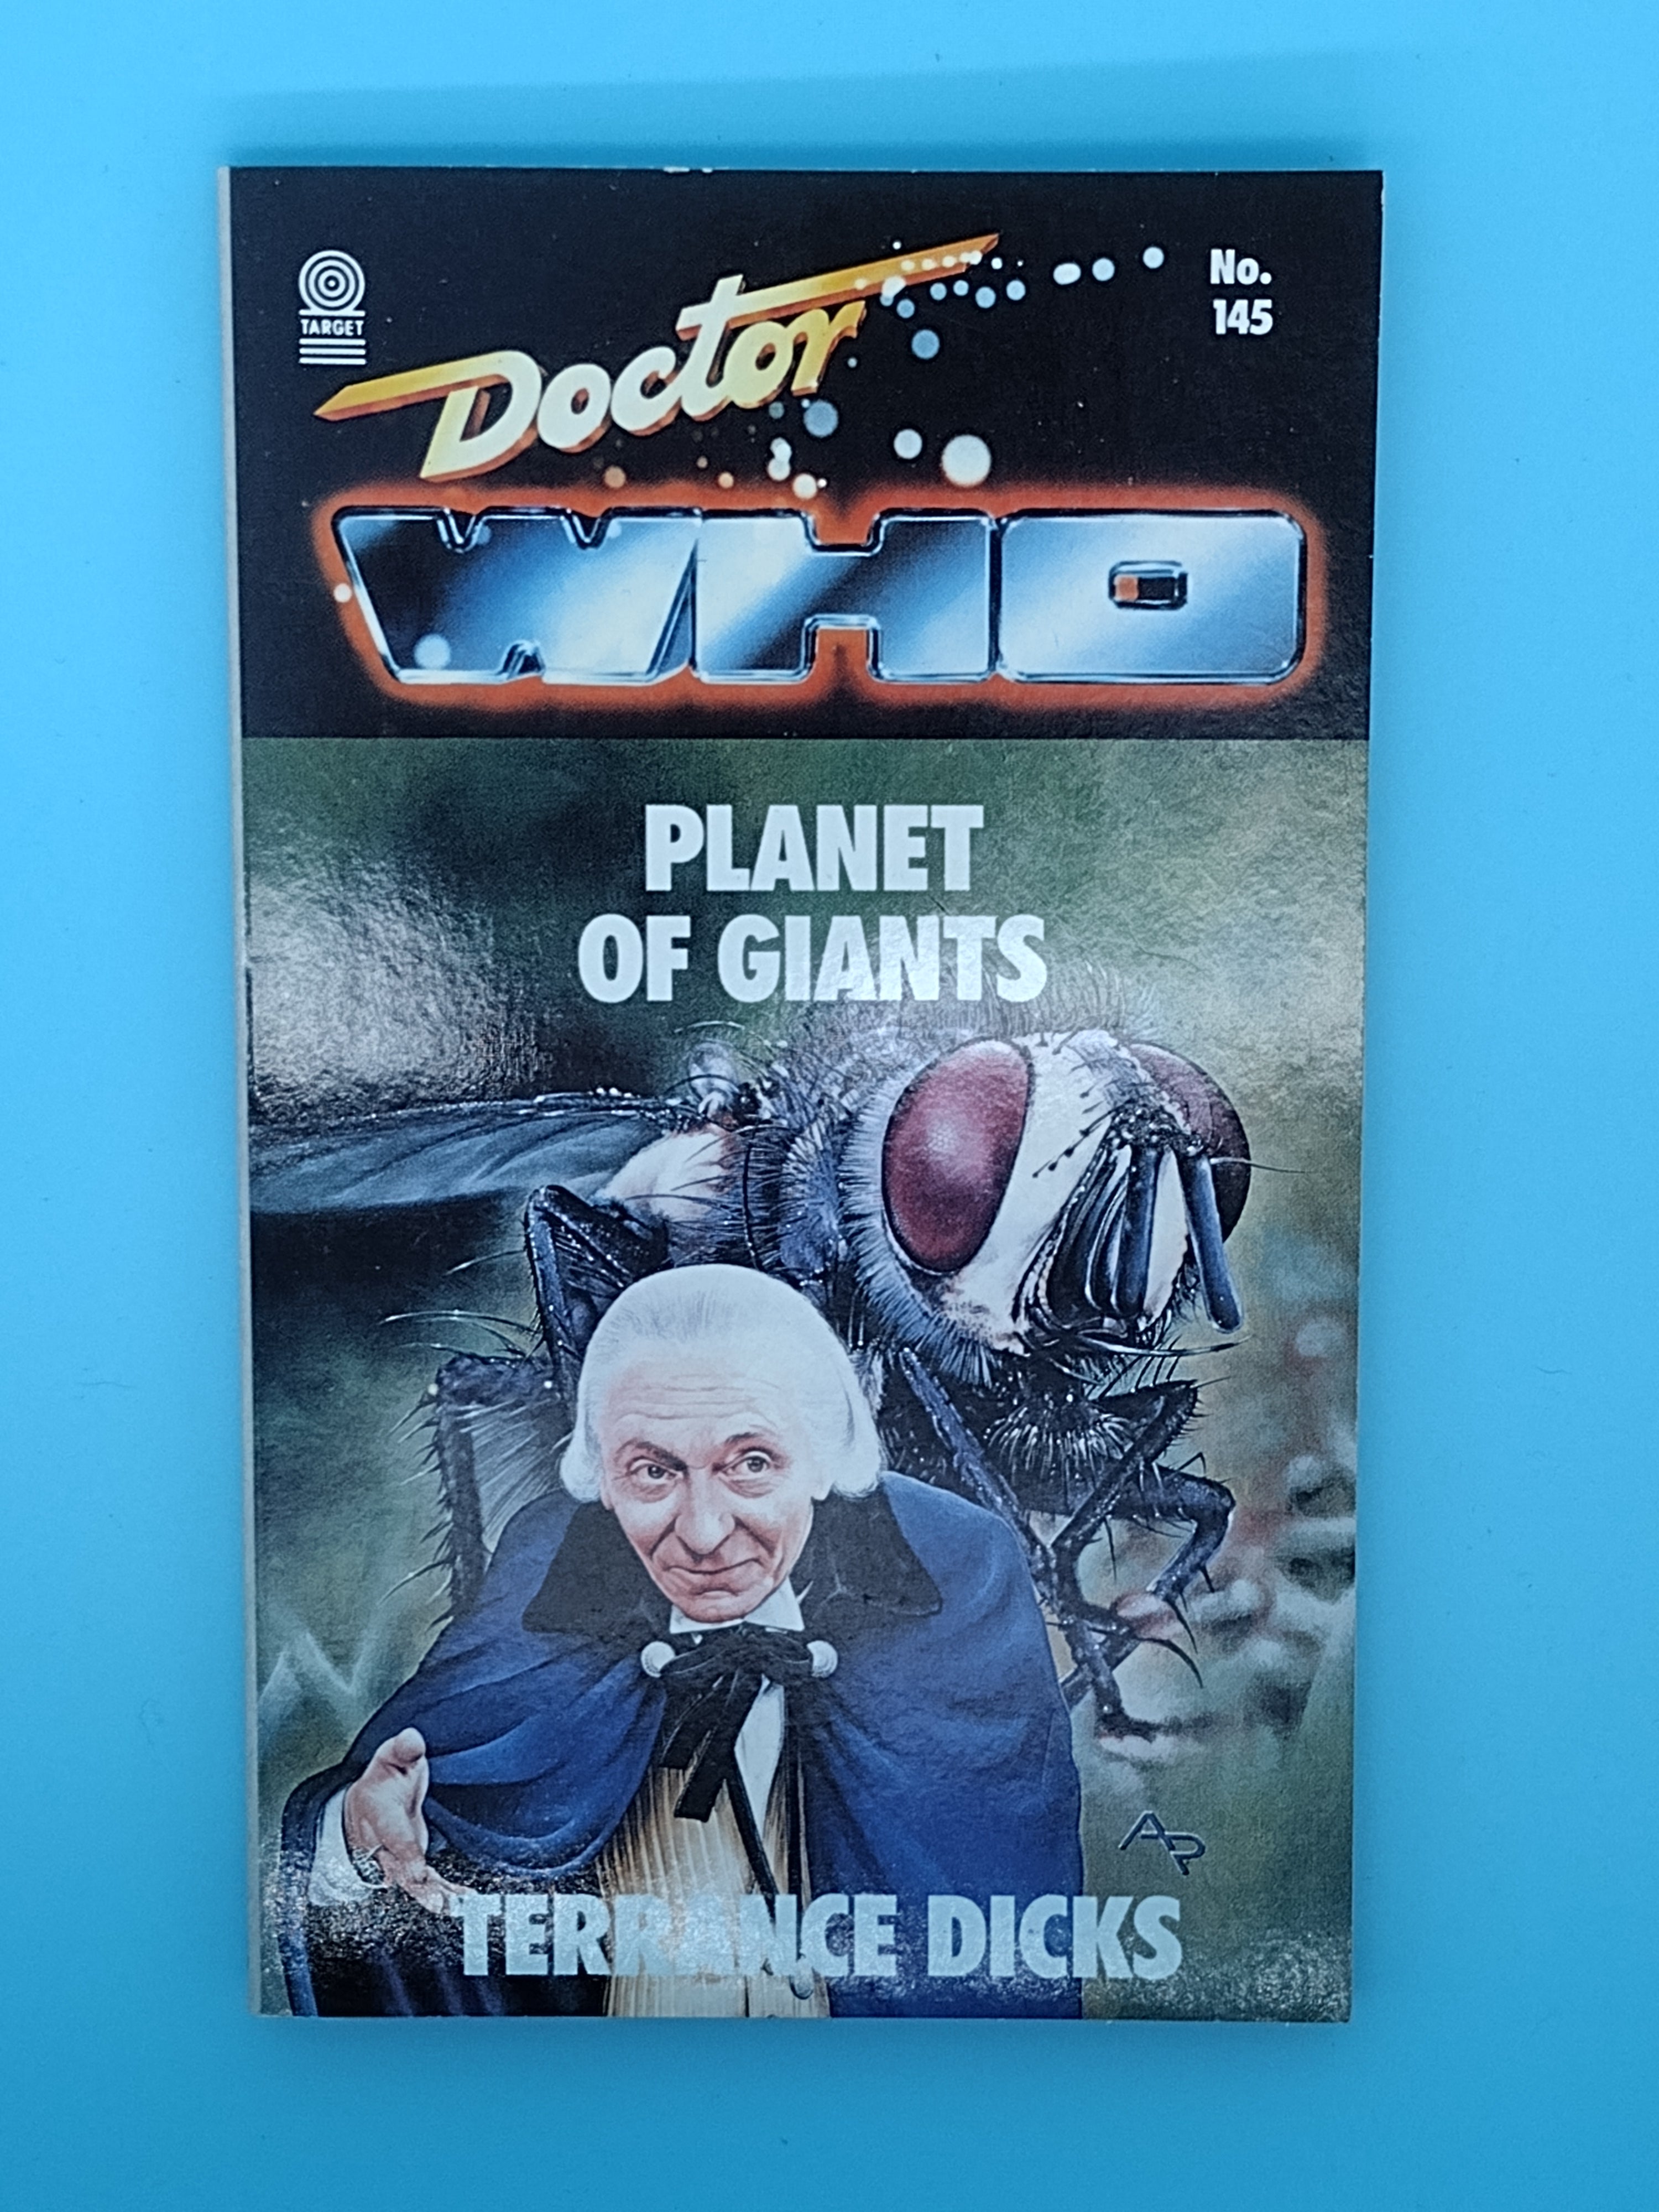 Doctor Who: Planet of Giants by Terrance Dicks